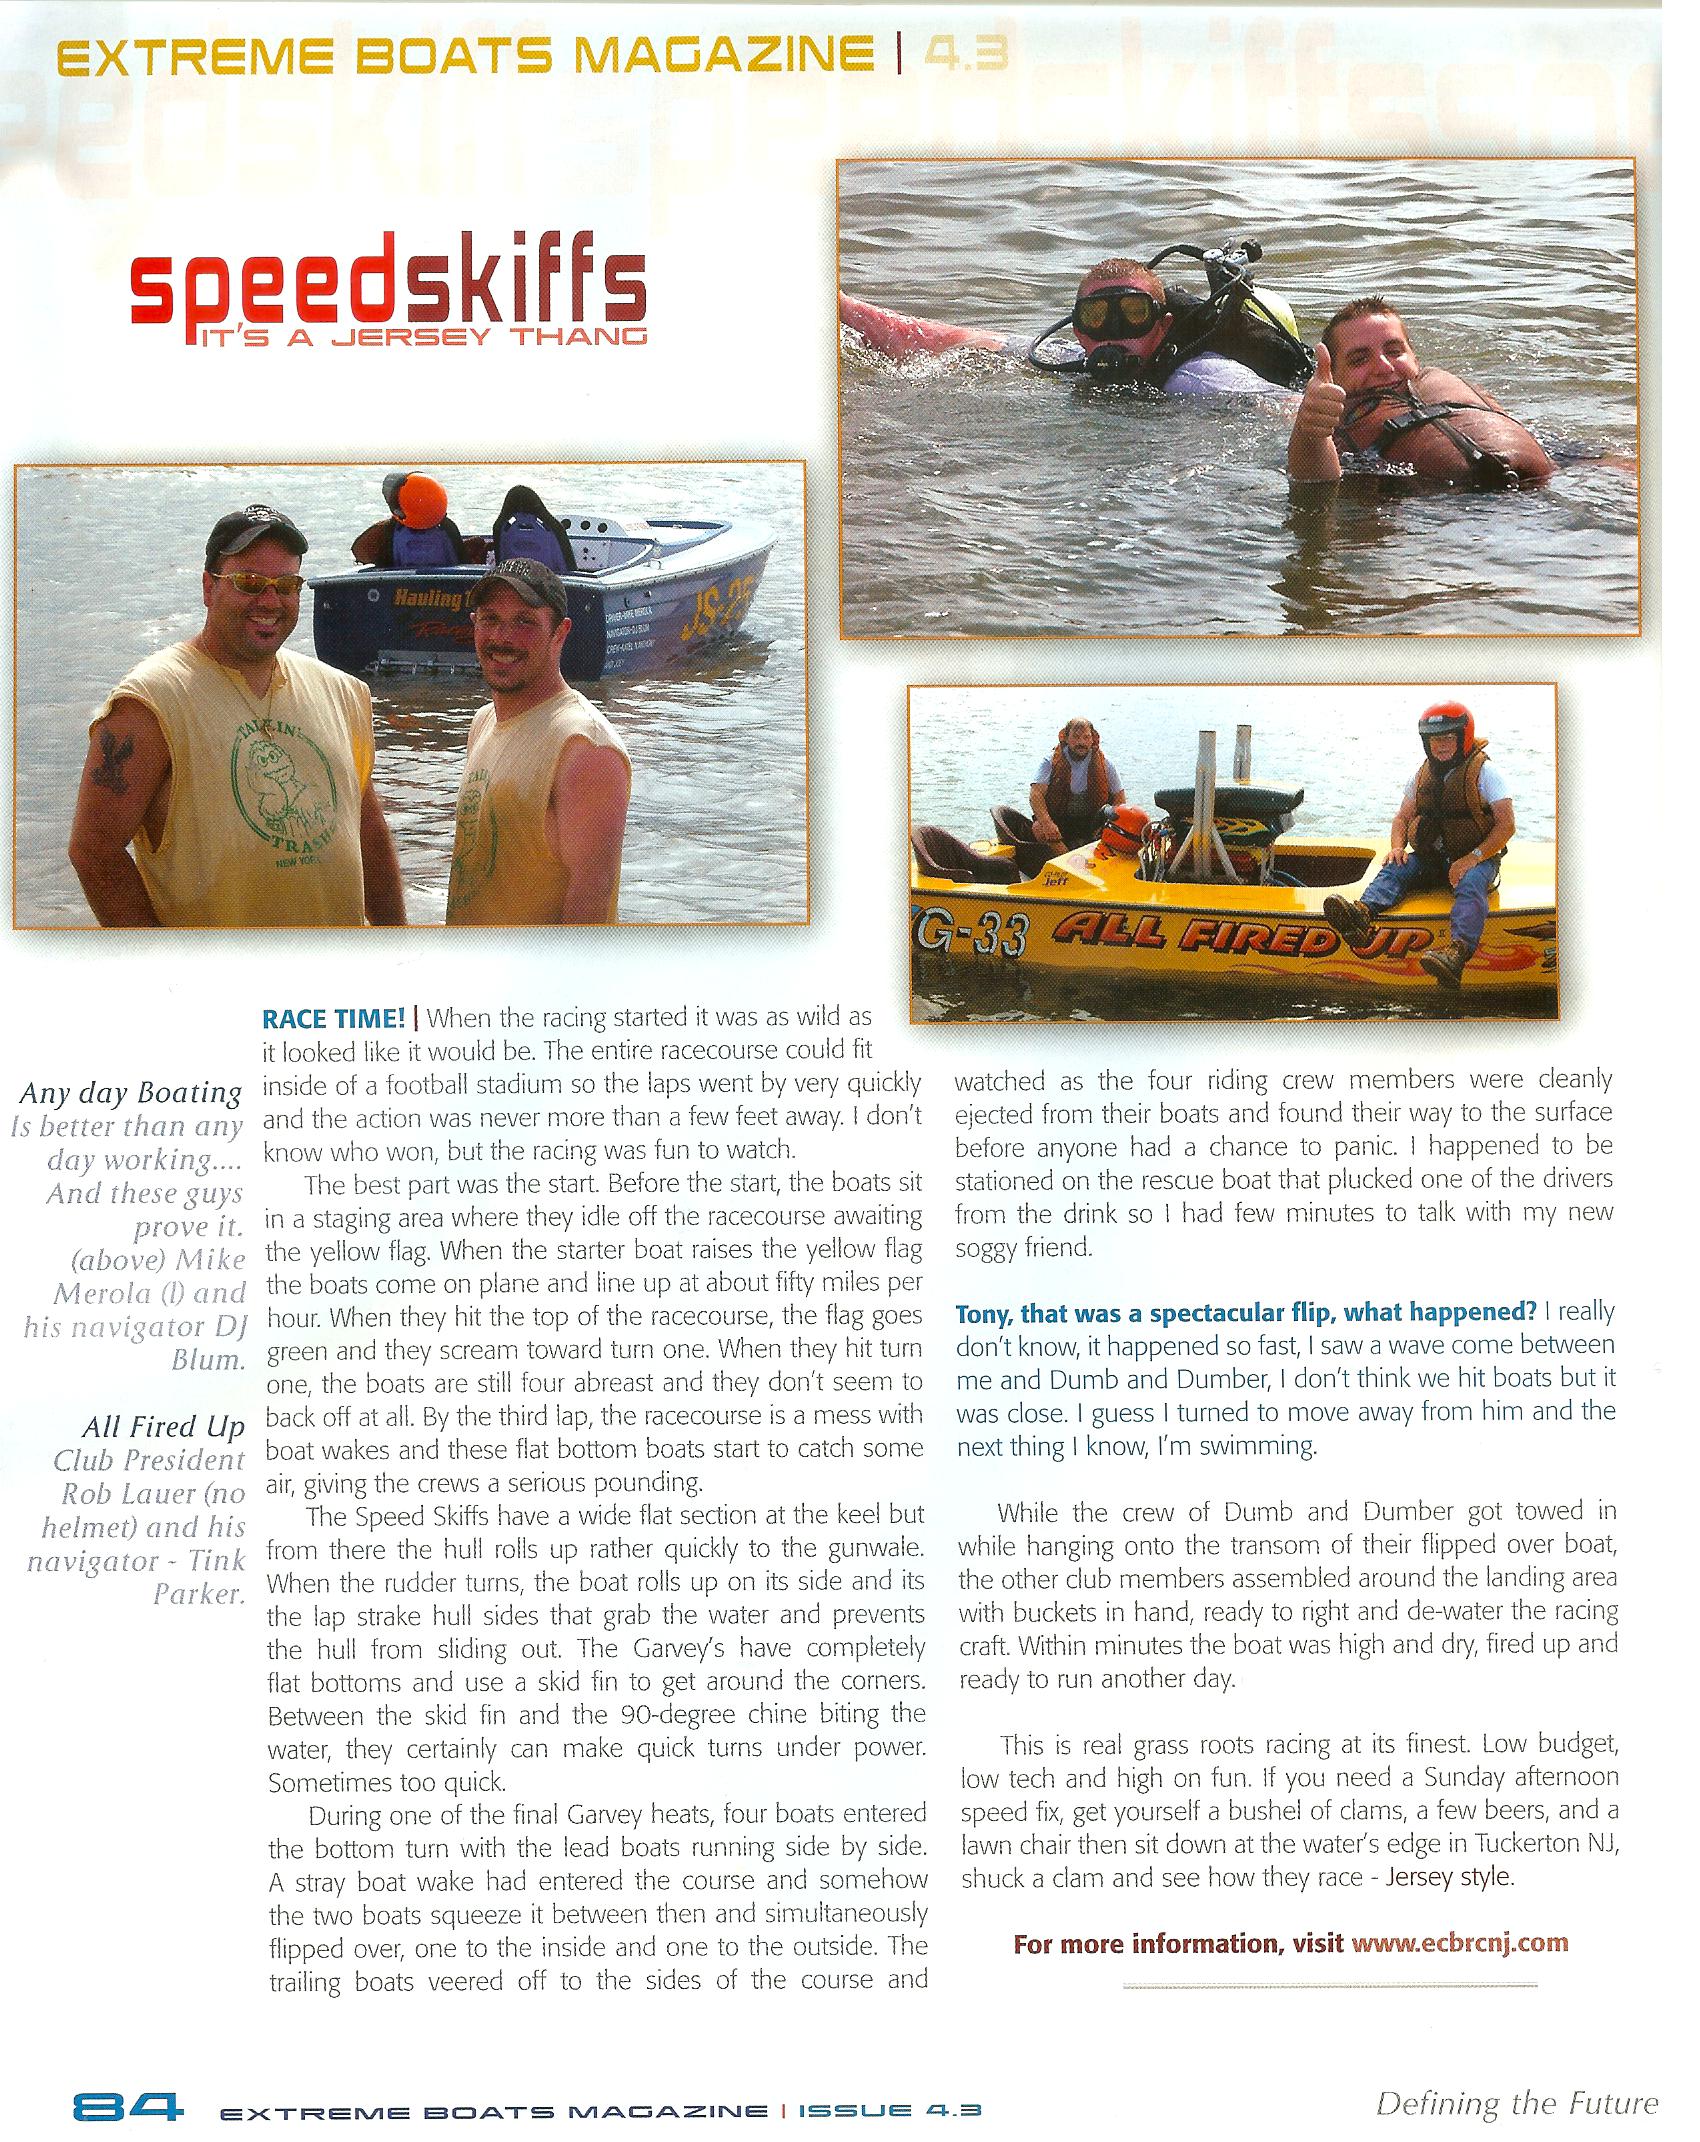 extremeboats2007pg84.jpg